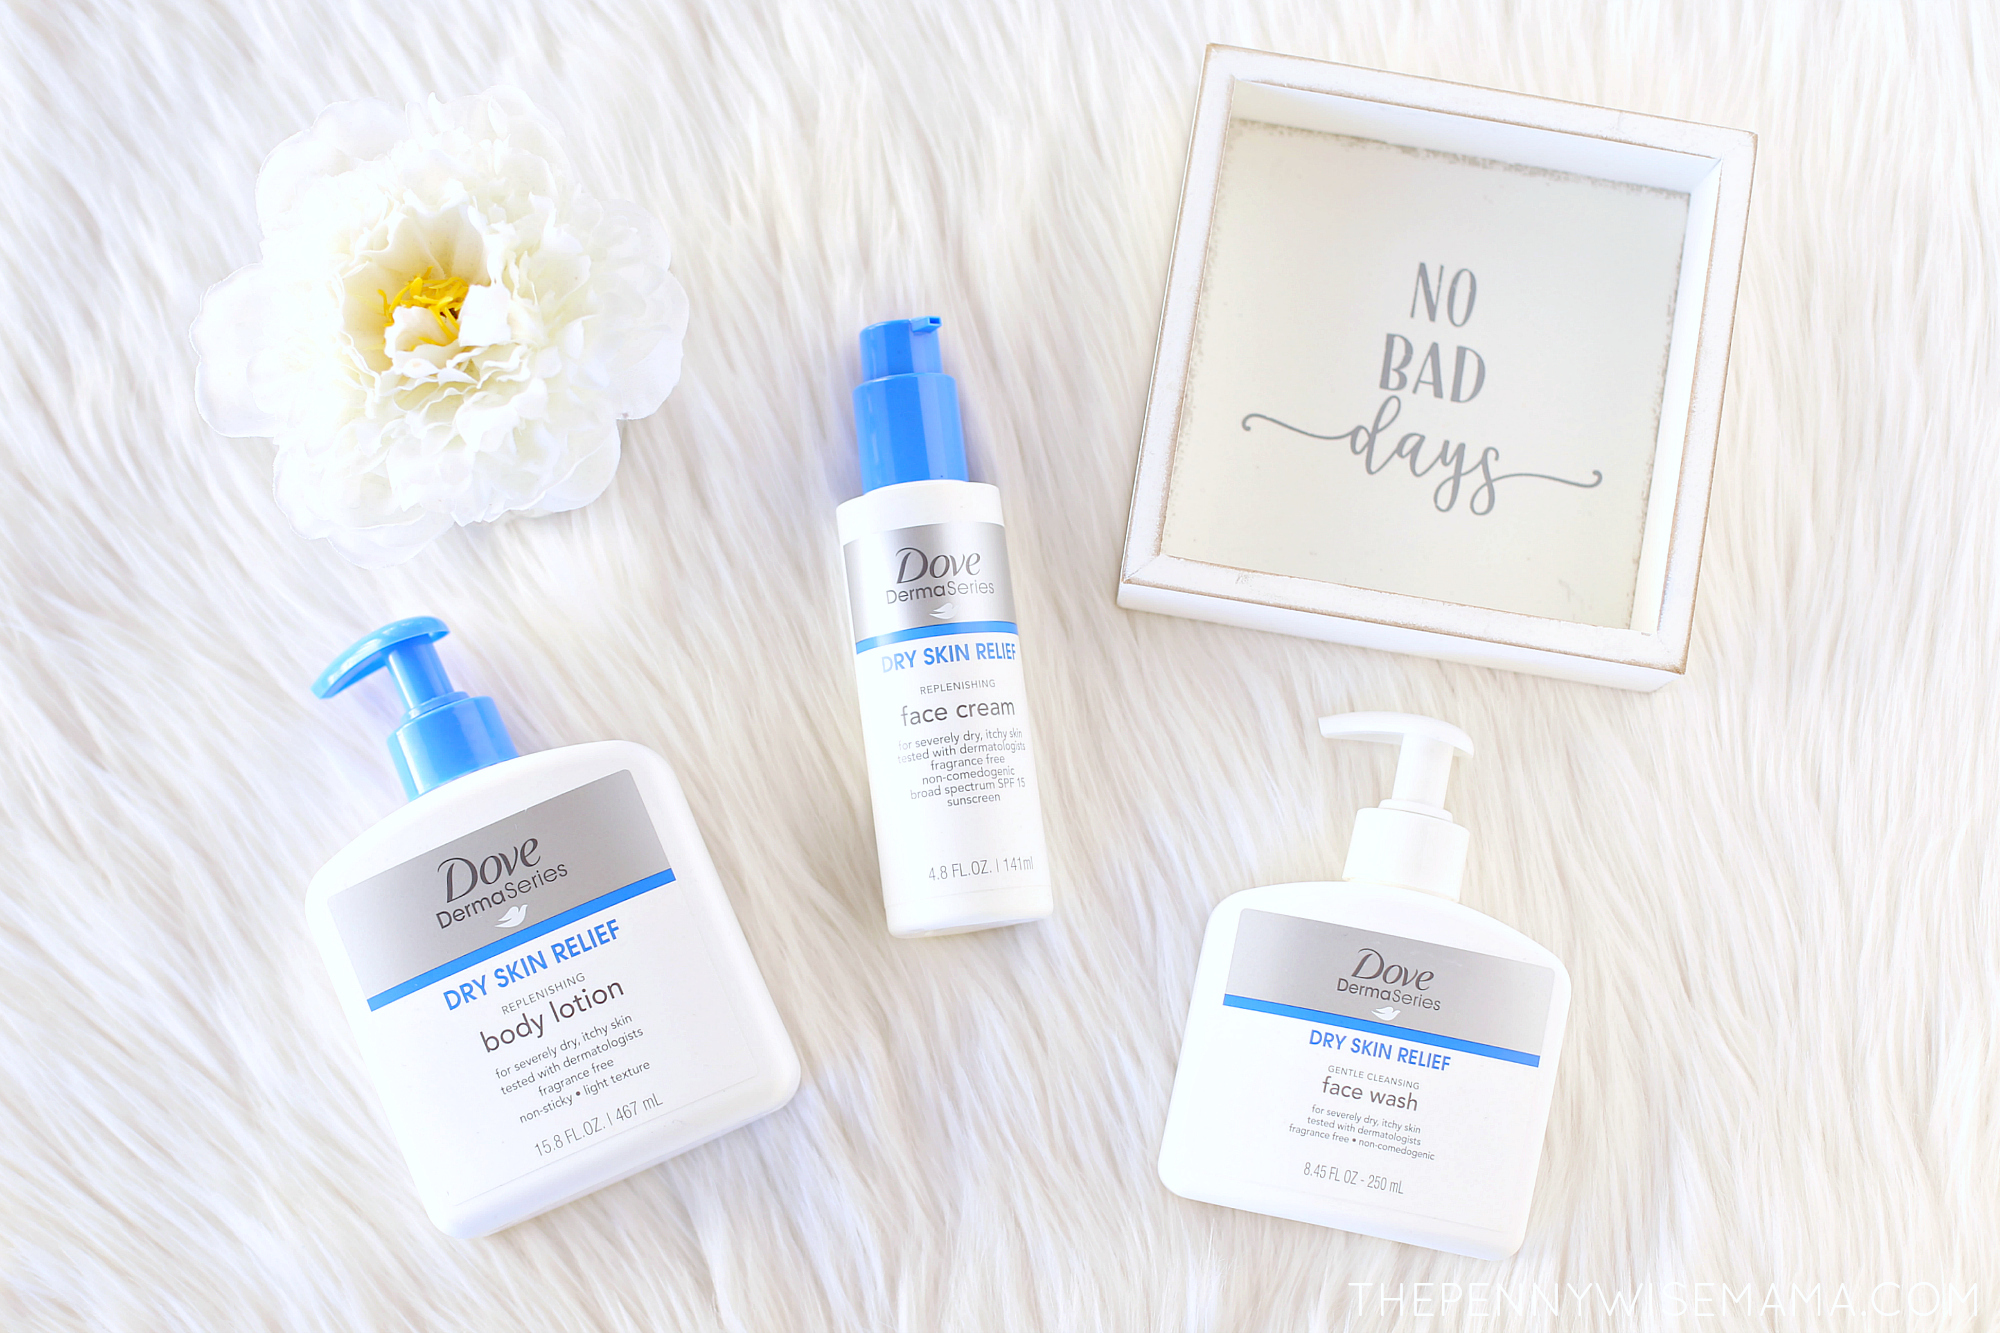 Dove DermaSeries Skincare Products